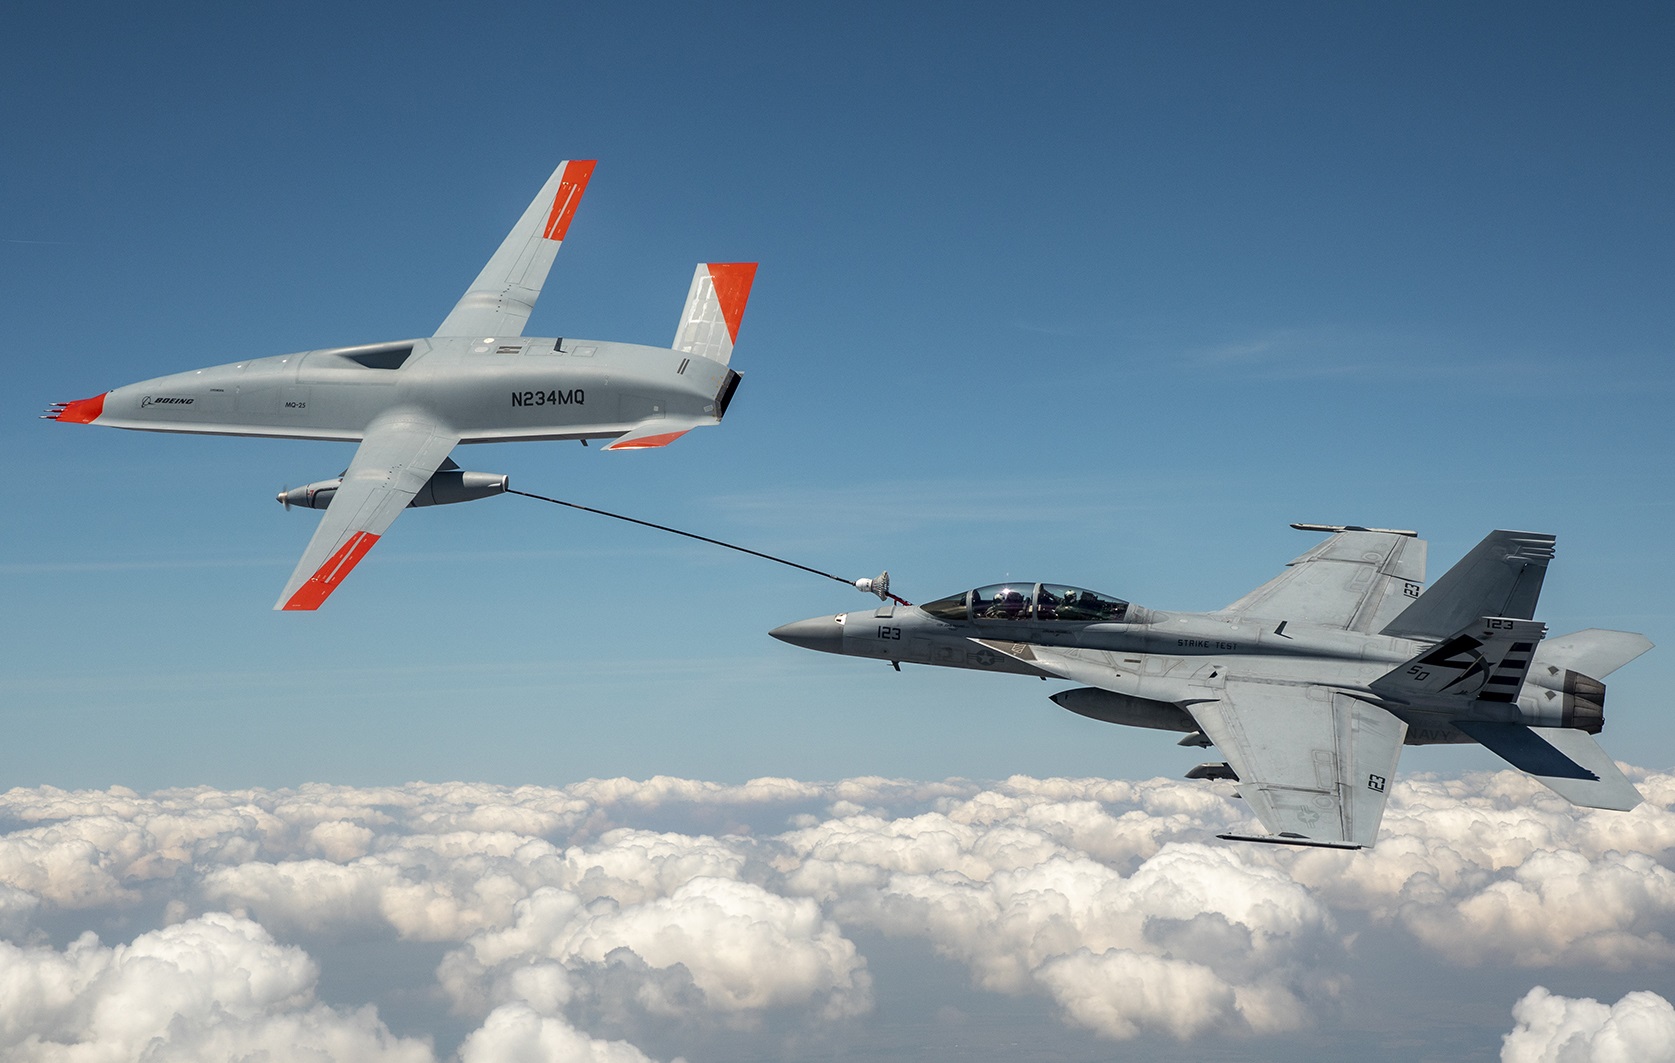 For the first time in history, the U.S. Navy and Boeing have demonstrated air-to-air refueling using an unmanned aircraft, the Boeing-owned MQ-25 T1 test asset, to refuel another aircraft. Click to enlarge.